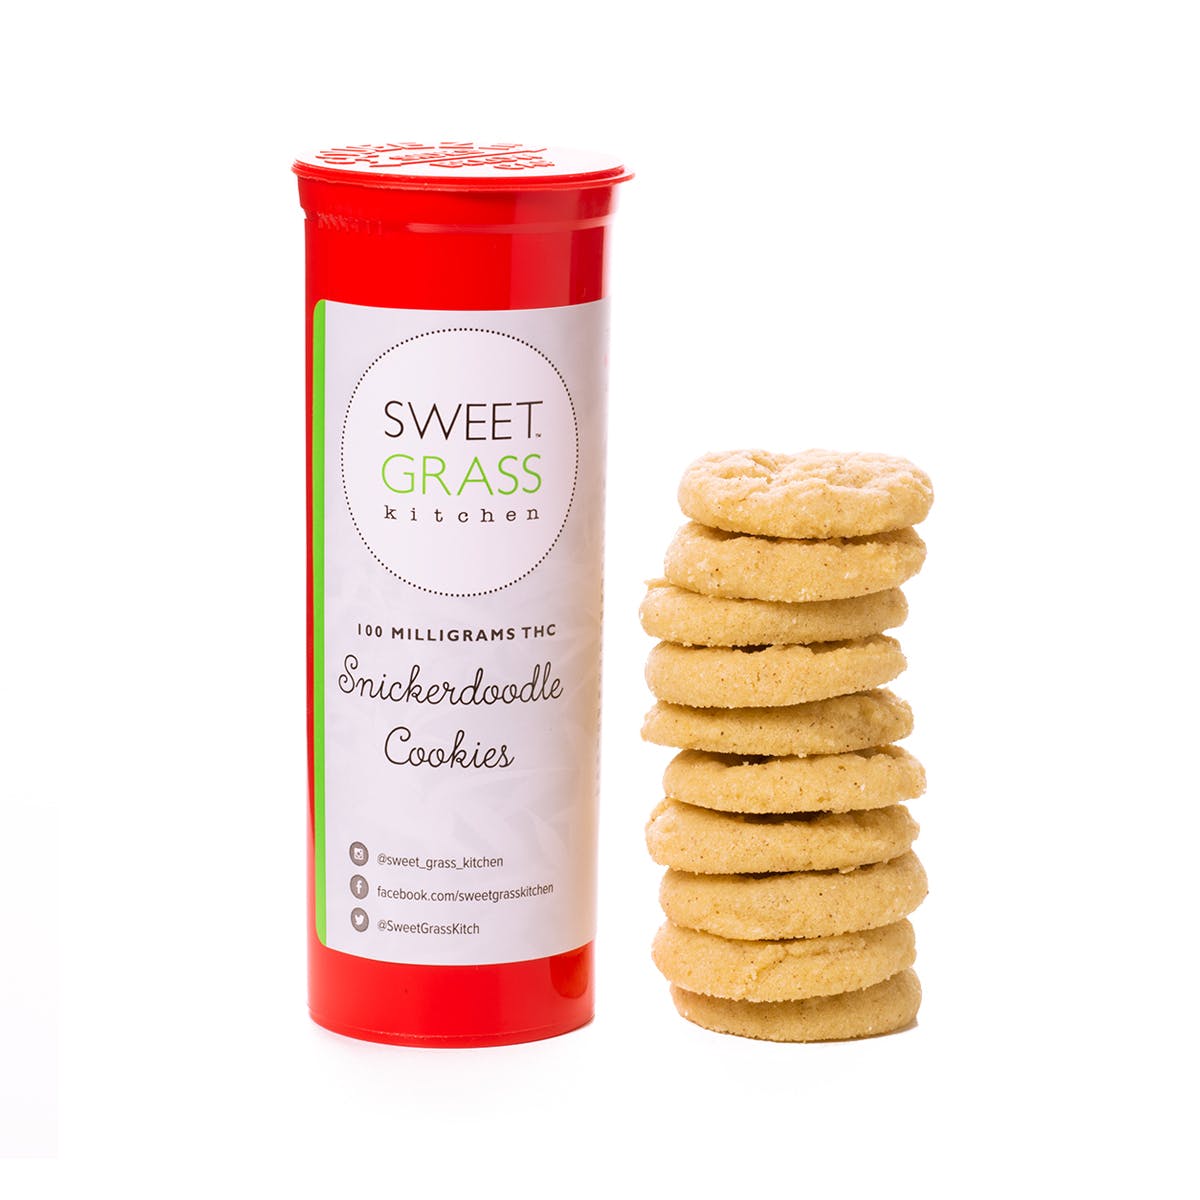 edible-sweet-grass-kitchen-snickerdoodle-cookie-100mg-2c-recreational